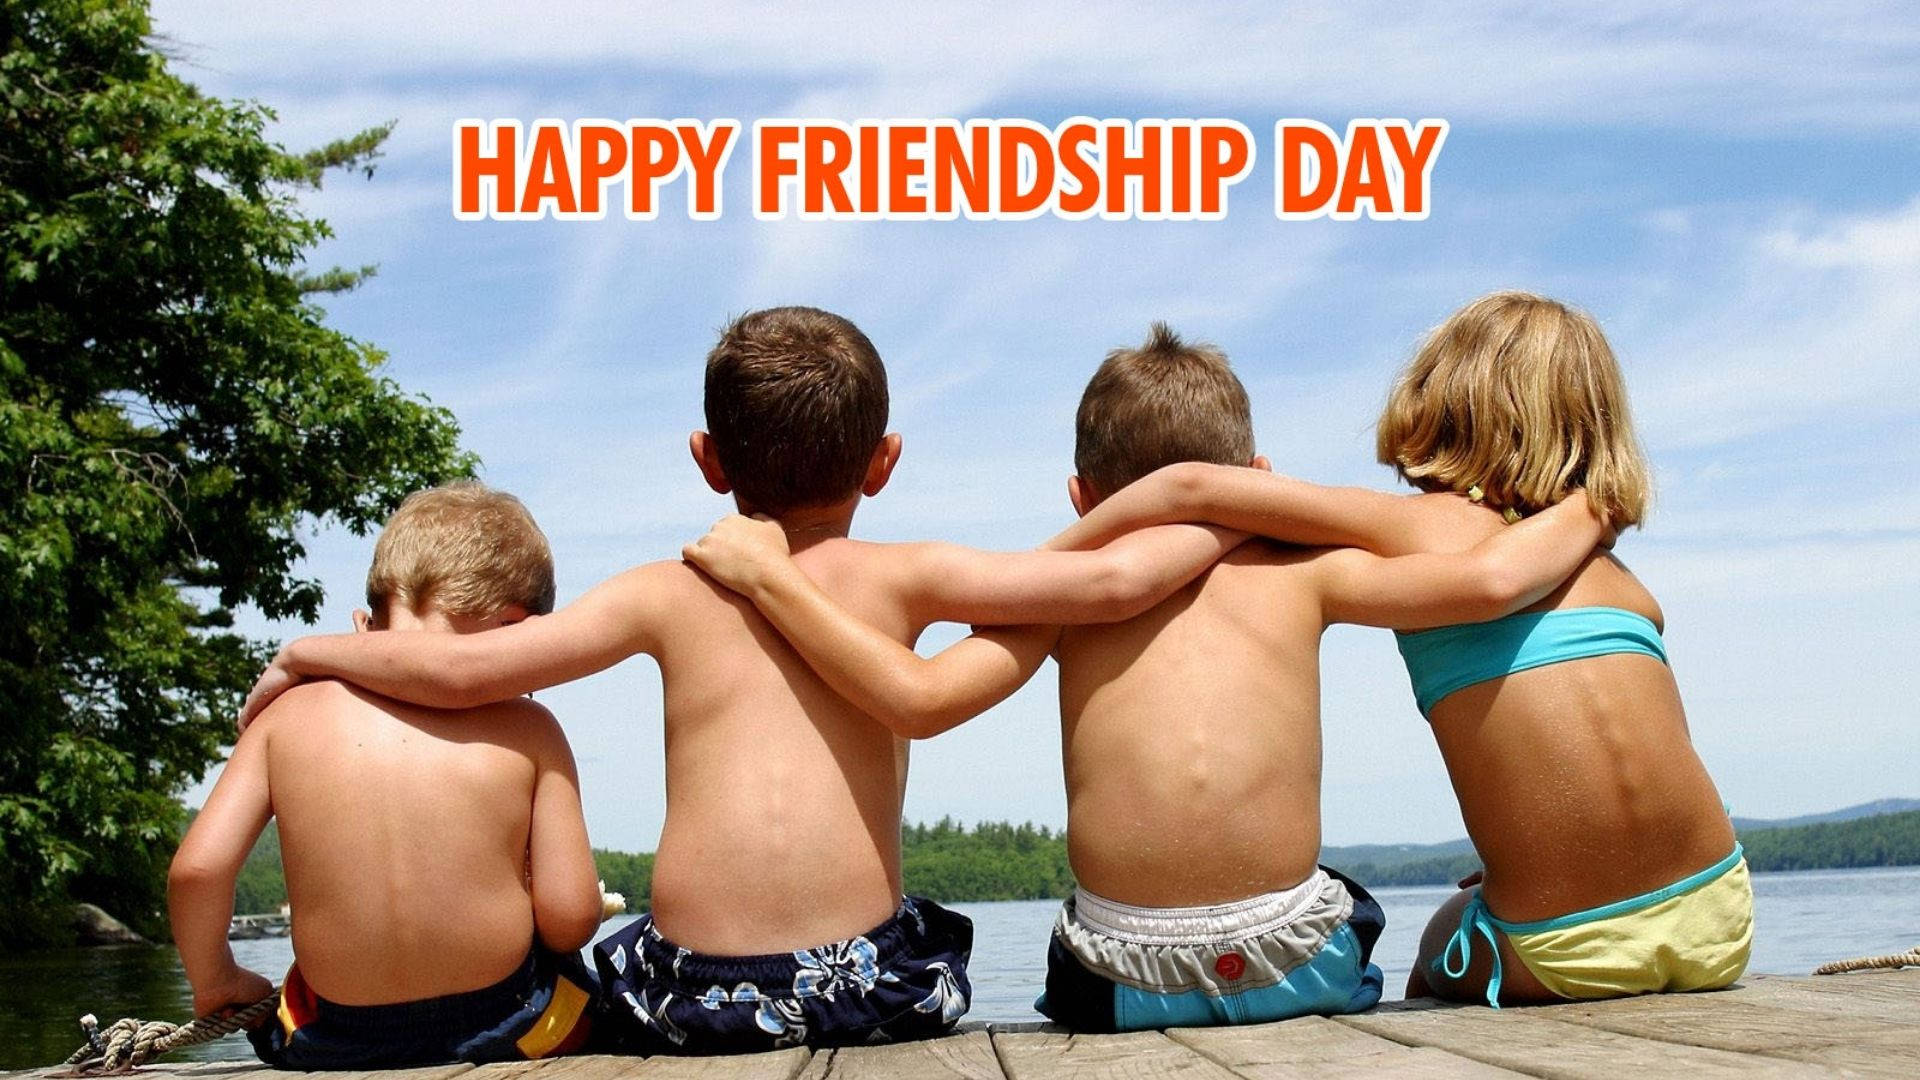 Kids Embracing For Friendship Day Background